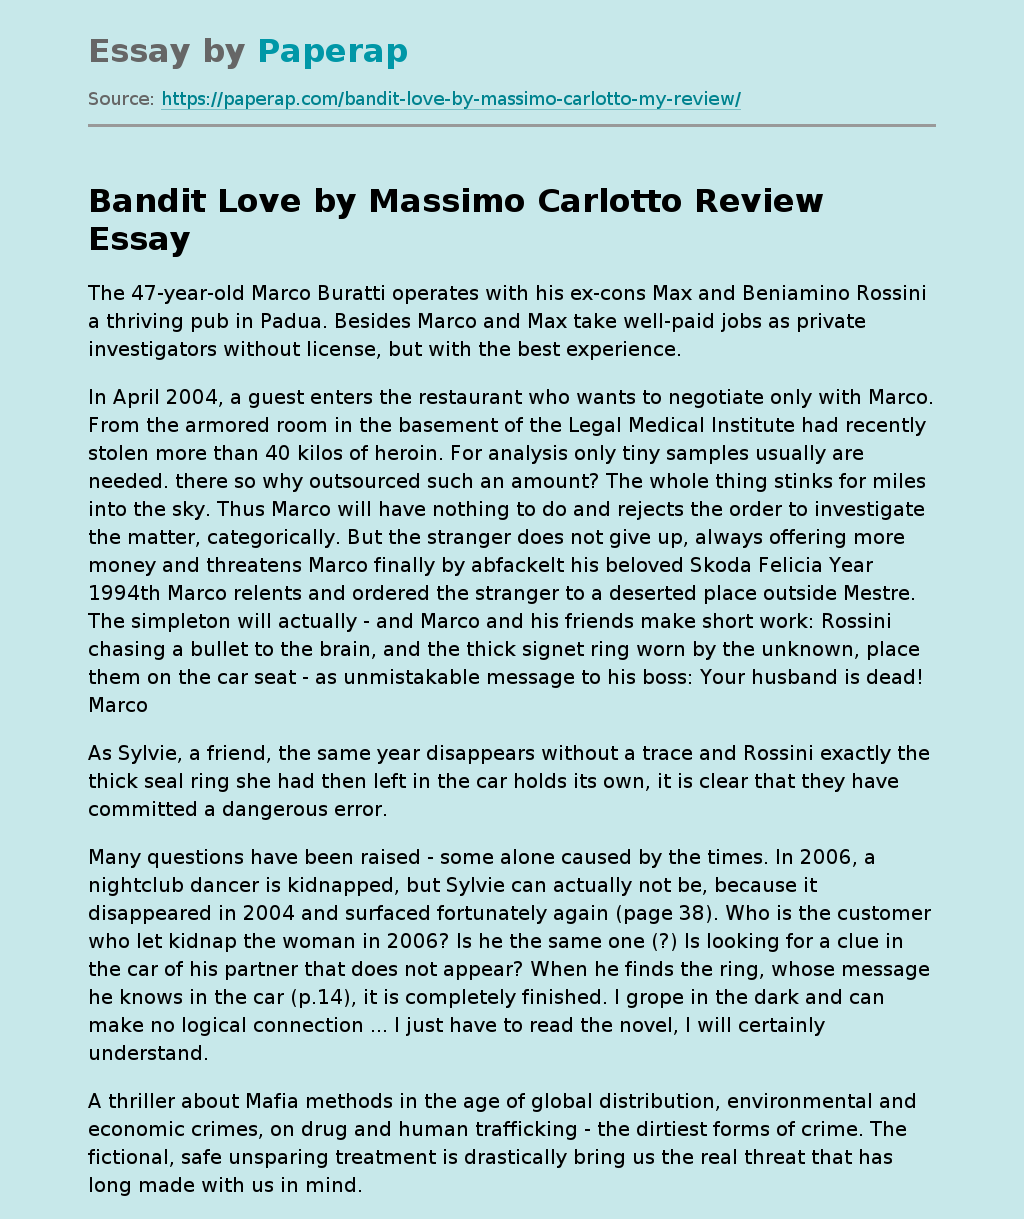 Bandit Love by Massimo Carlotto Review